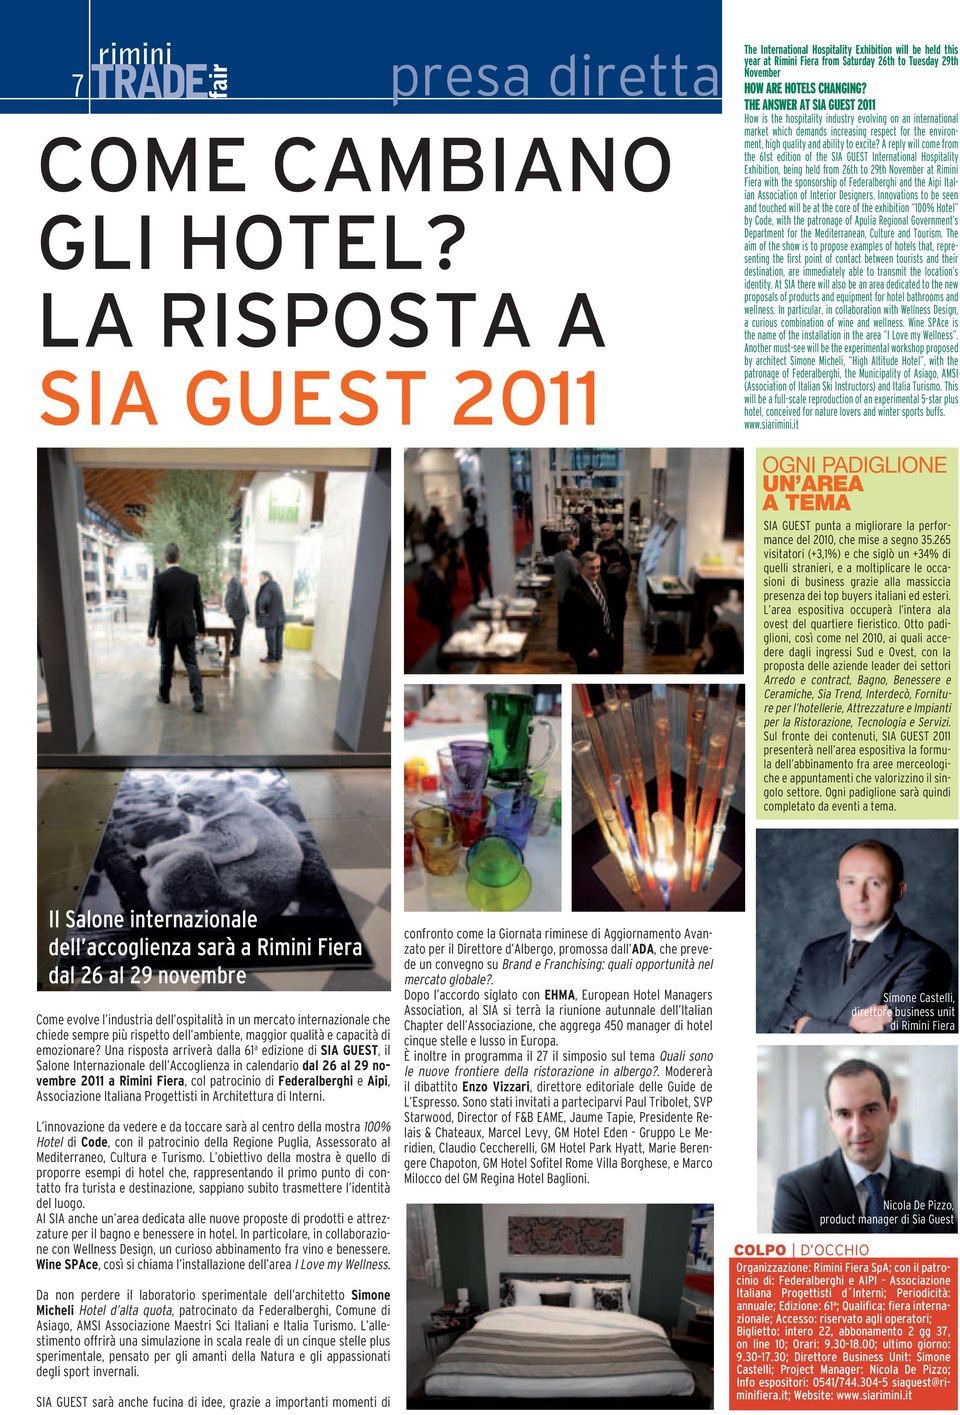 THE ANSWER AT SIA GUEST 2011 How is the hospitality industry evolving on an international market which demands increasing respect for the environment, high quality and ability to excite?